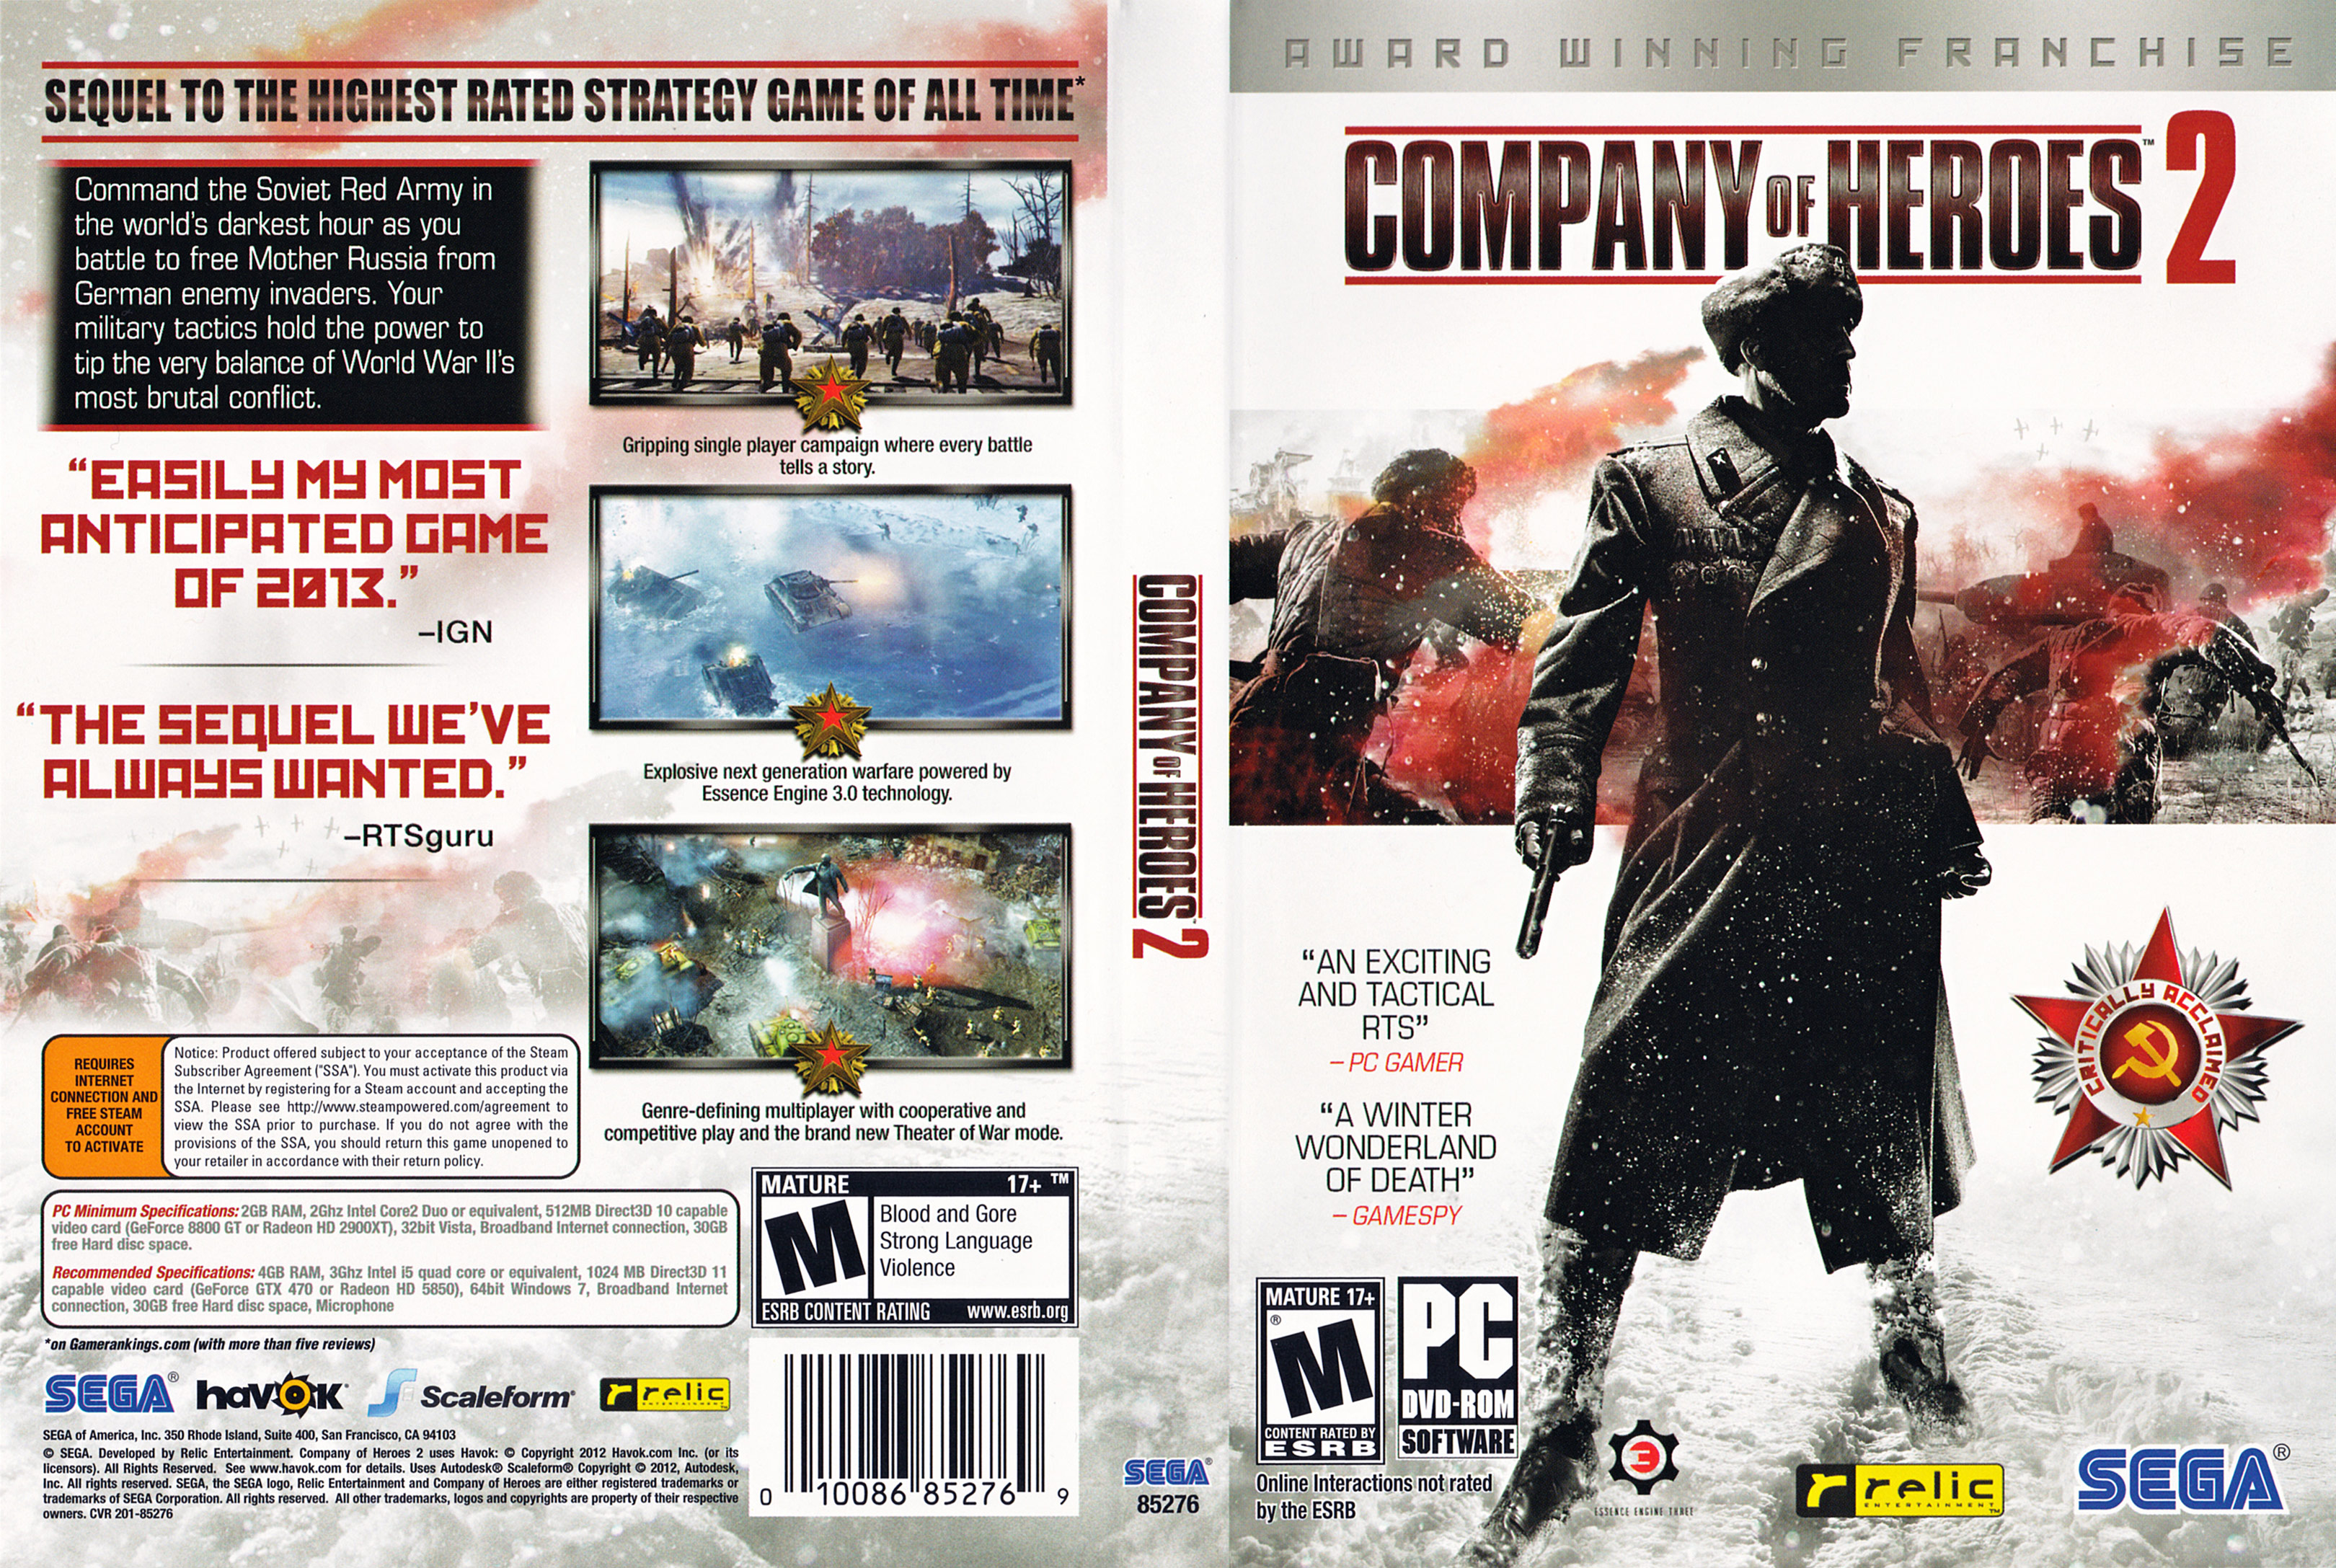 Company of Heroes 2 - DVD obal 2